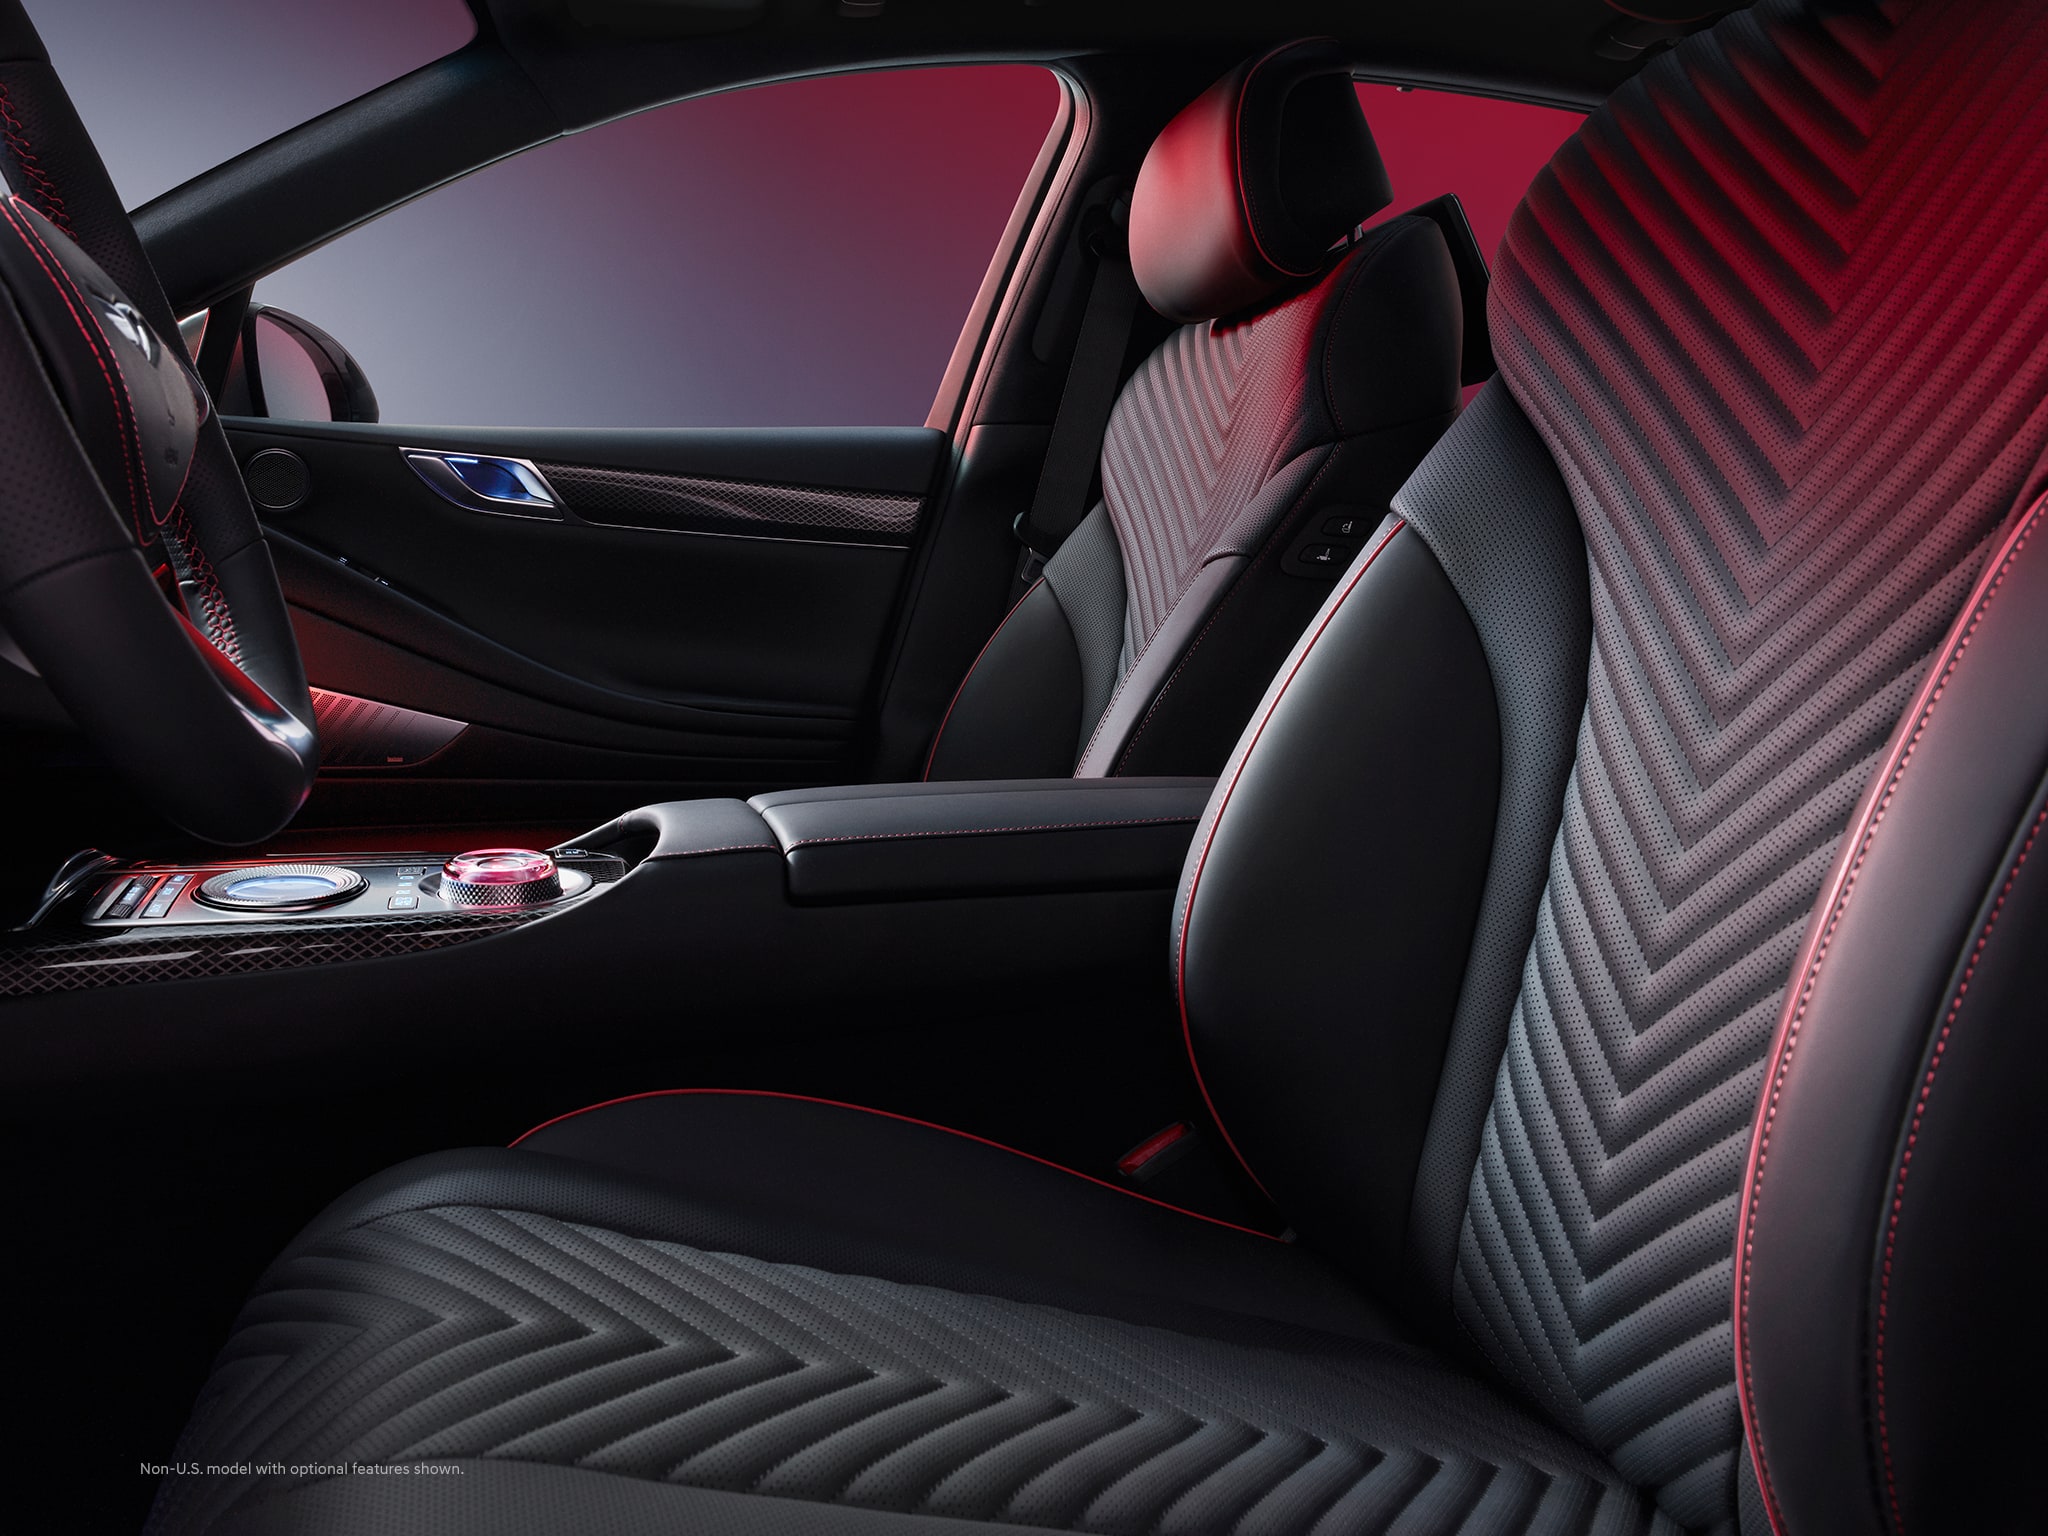 2022 Genesis G80 interior shown in Black with Red Stitching.